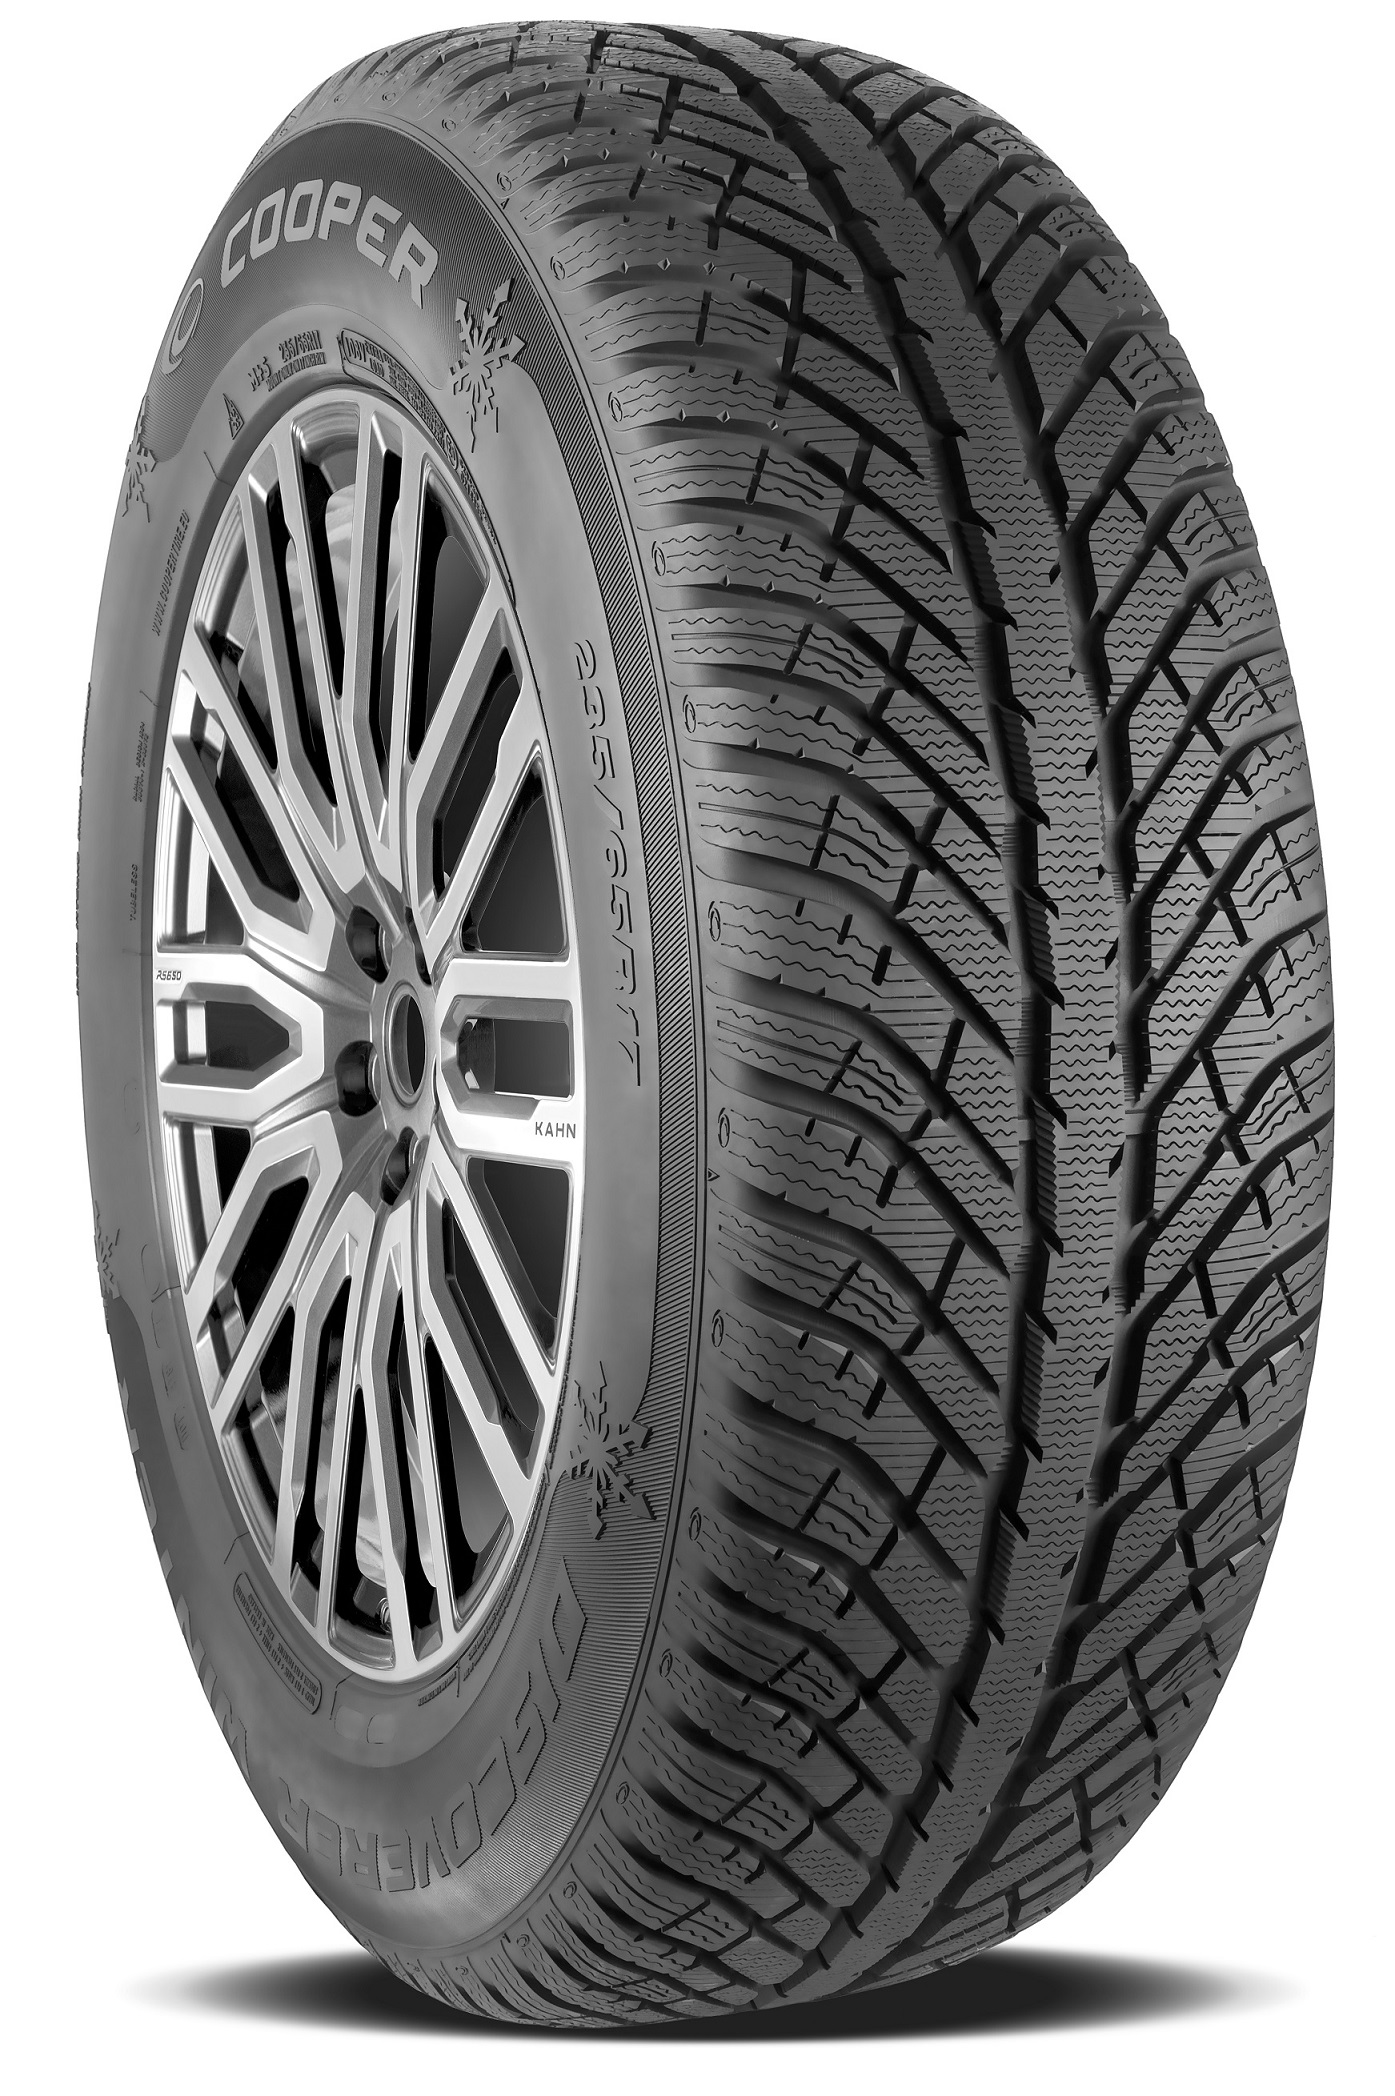 Gomme Nuove Cooper Tyres 215/55 R18 99V DISCOVERER WINTER XL M+S pneumatici nuovi Invernale